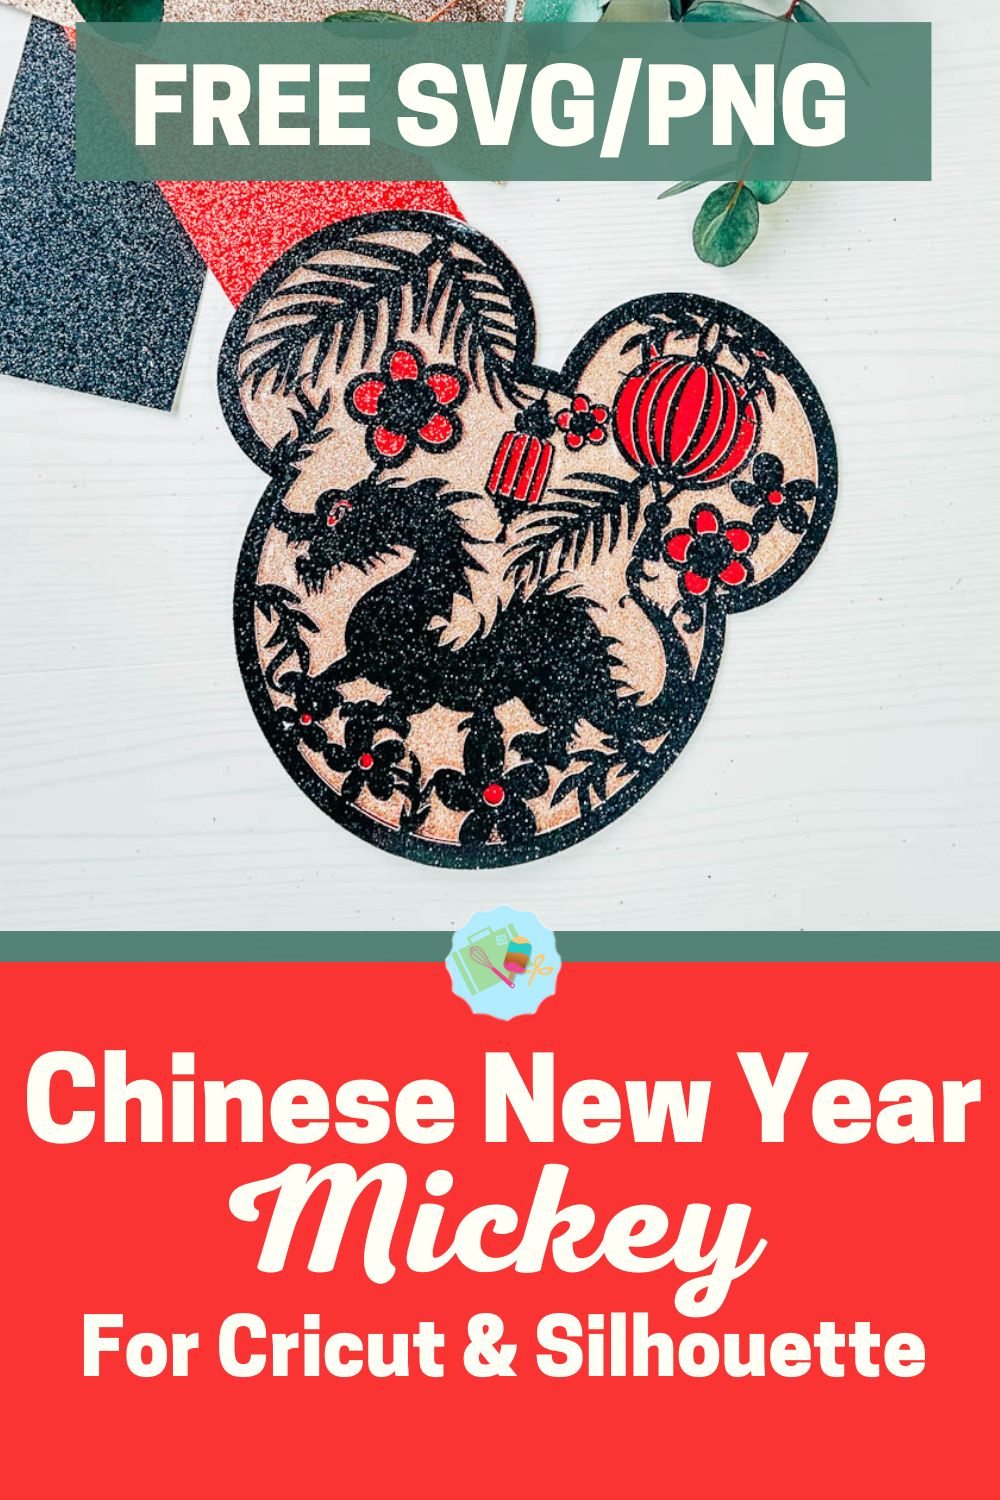 SVG PNG Chinese New Year, Year of the Dragon Mickey for Cricut and Silhouette